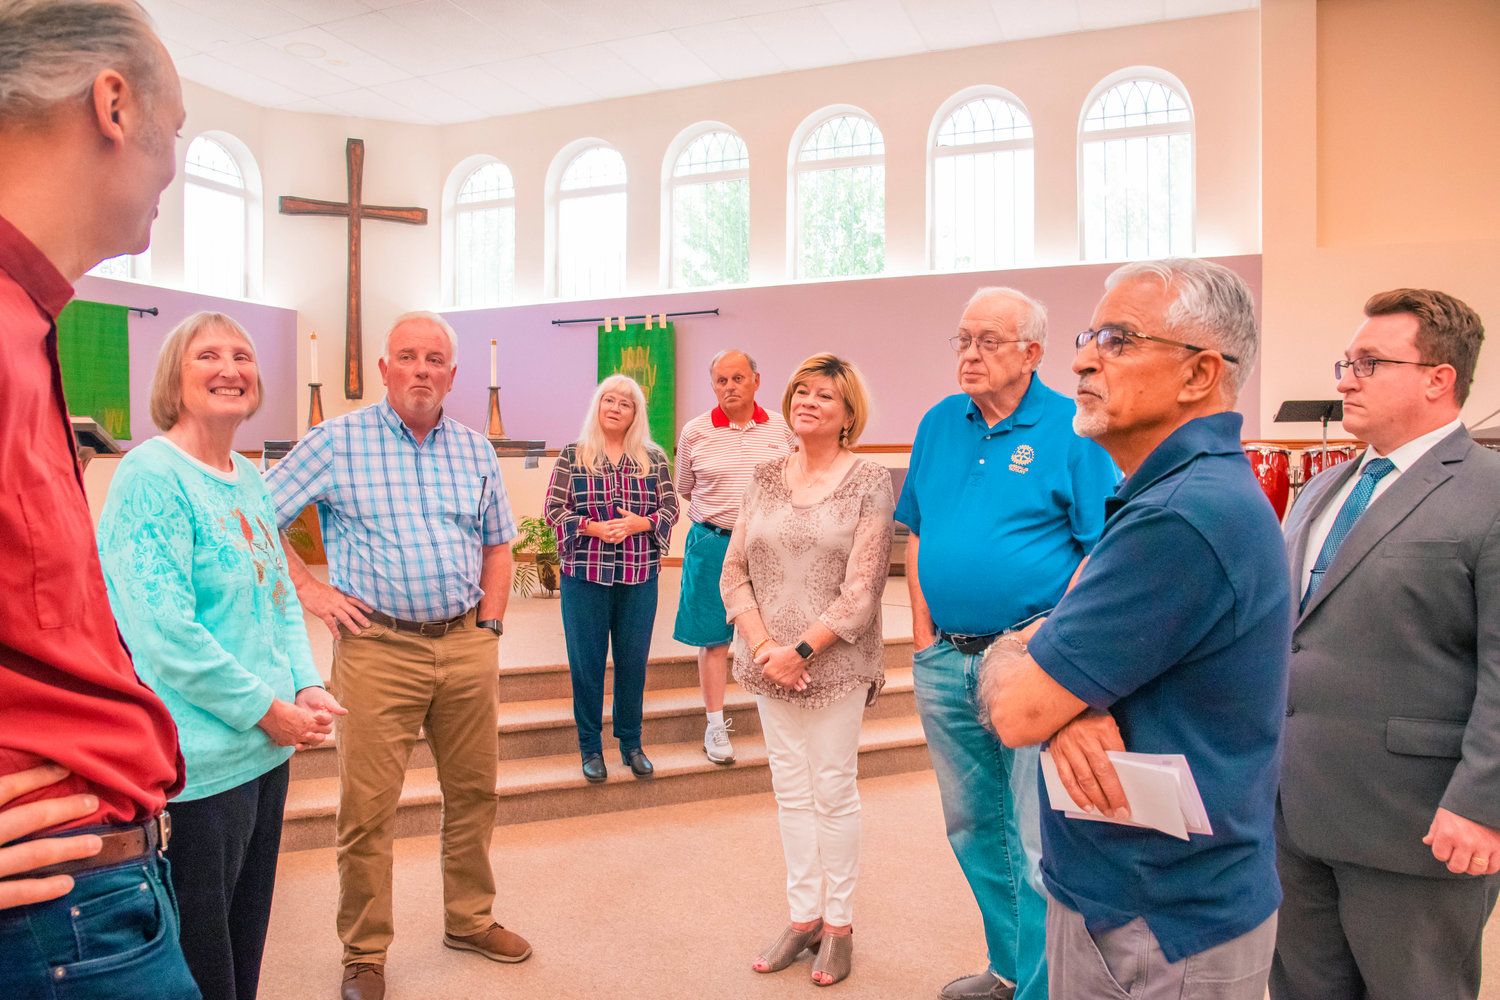 Community leaders tell stories of Dr. Richard Phillips and talk about why they wanted funds to go toward the Dolly Parton Imagination Library Thursday at Immanuel Lutheran Church in Centralia.